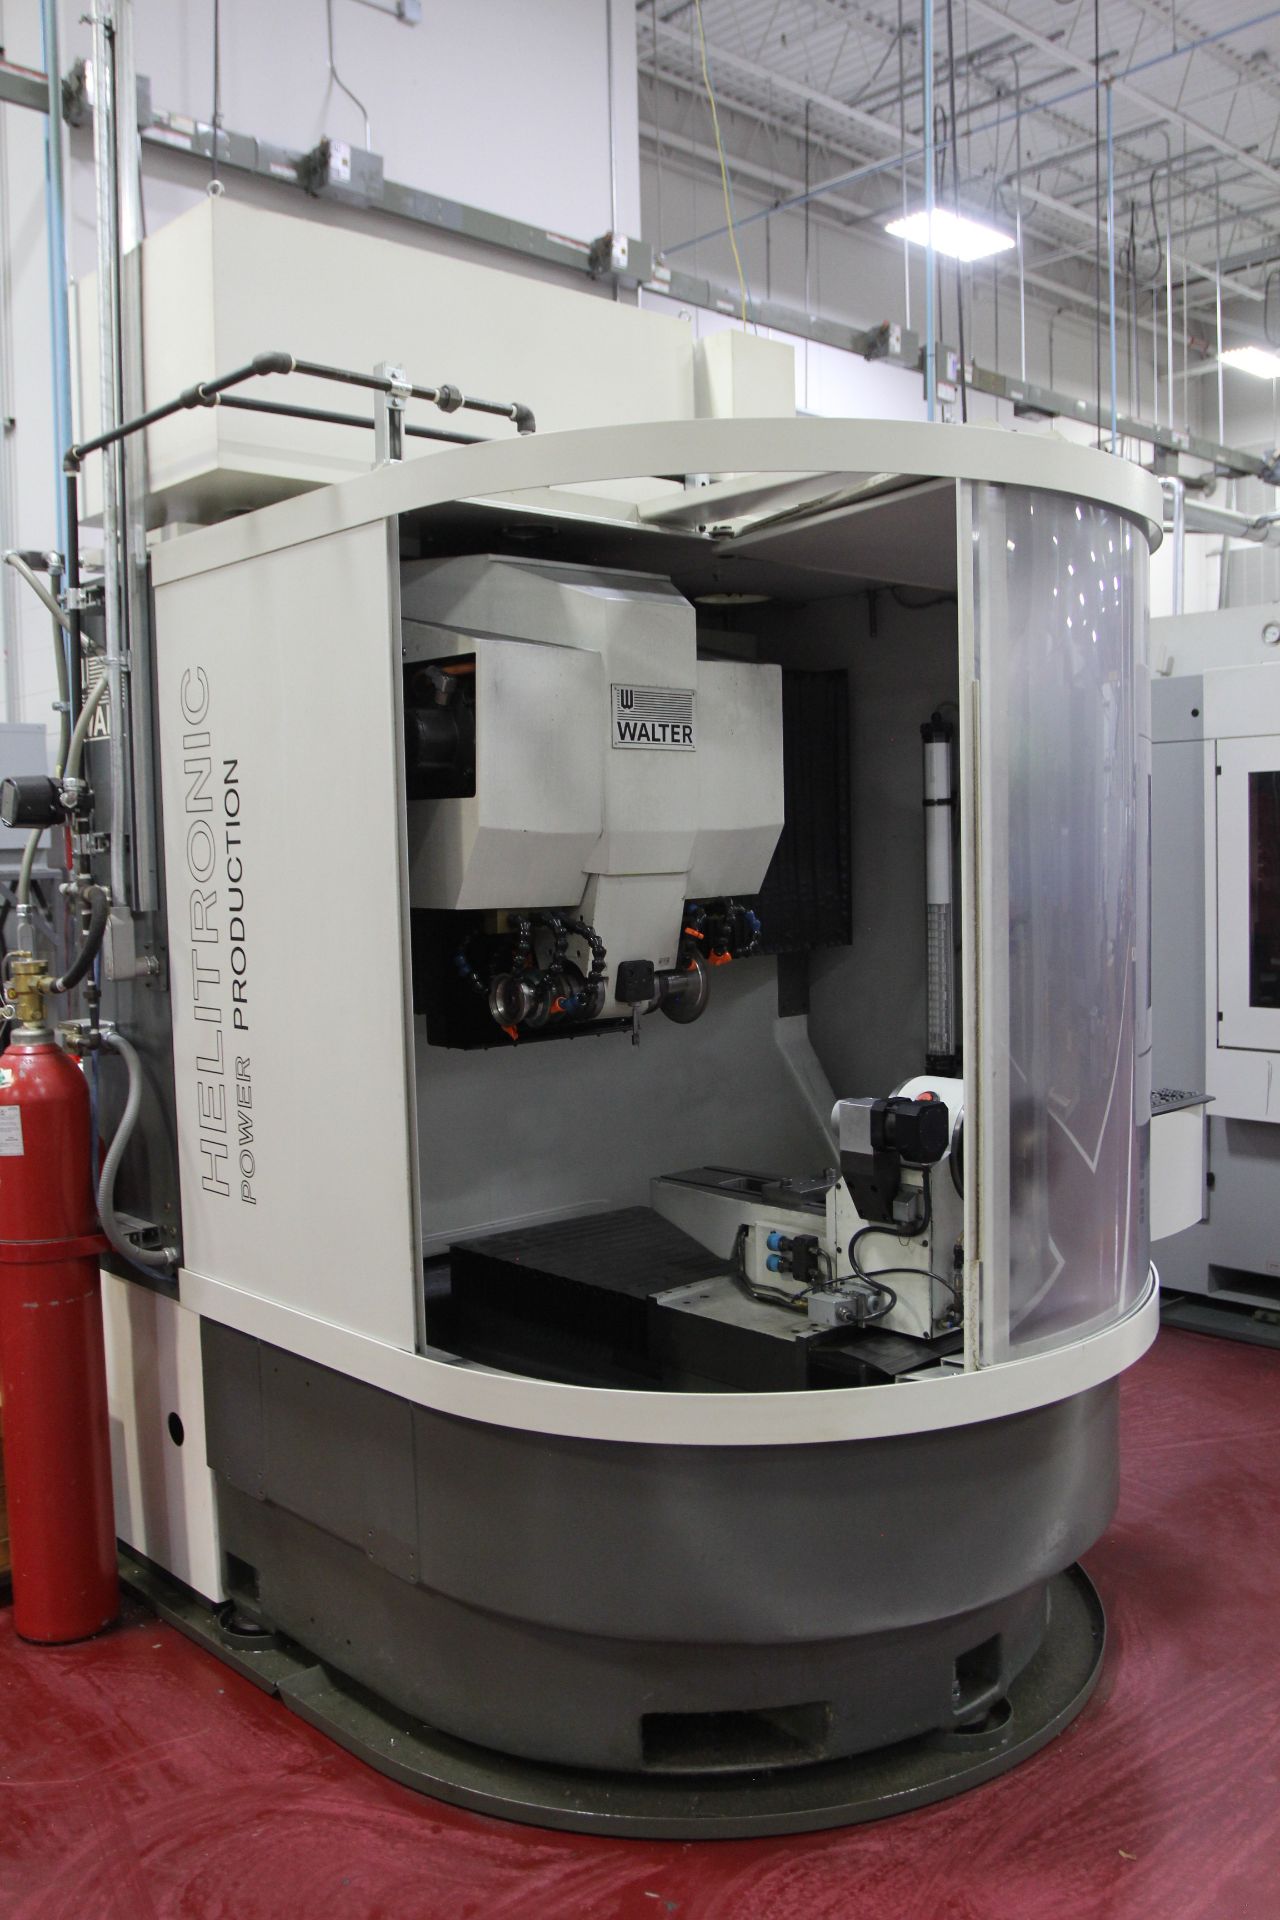 1999 WALTER HELITRONIC POWER CNC 5 Axis PRECISION GRINDER, s/n 650005, w/ HMC500 WWM Control, Tool - Image 3 of 4